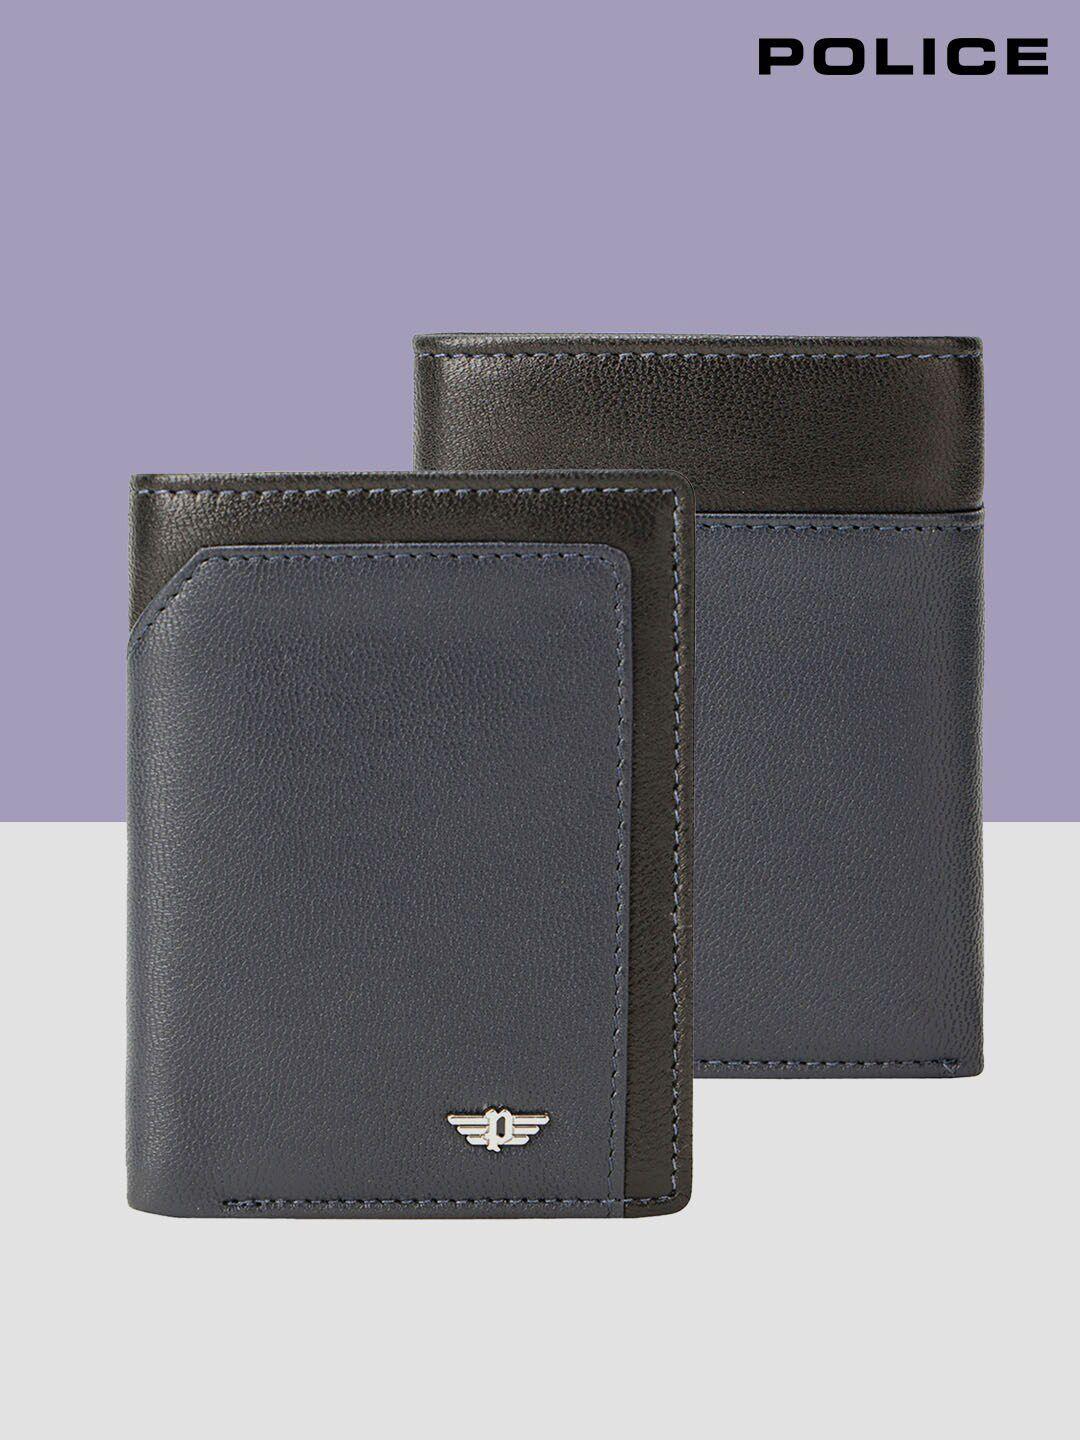 police men leather three fold wallet